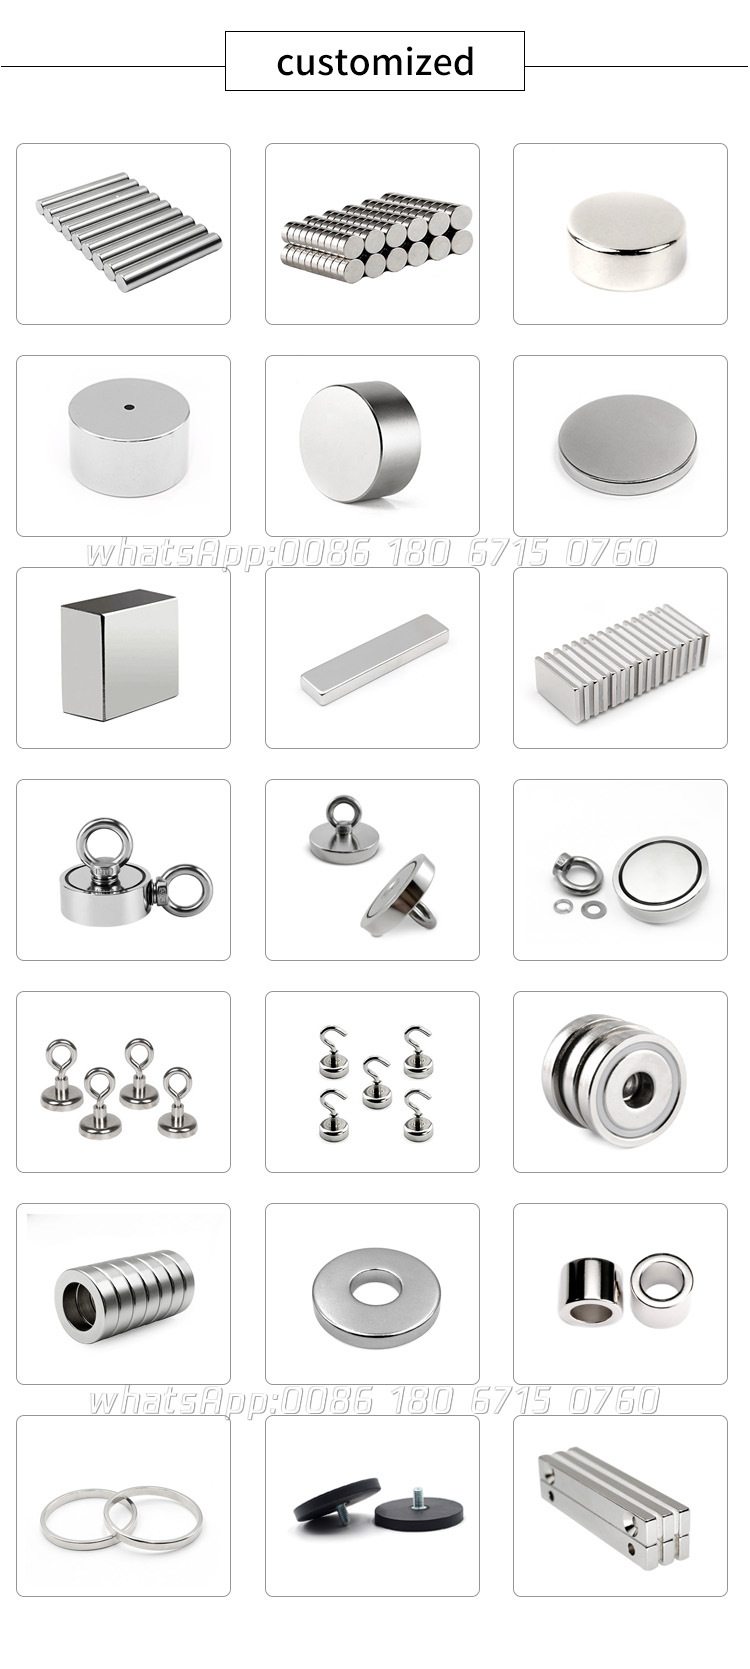 Rare Earth Nickel Copper Nickel Plated Permanent Magnets Suitable for Magnetizing Tools